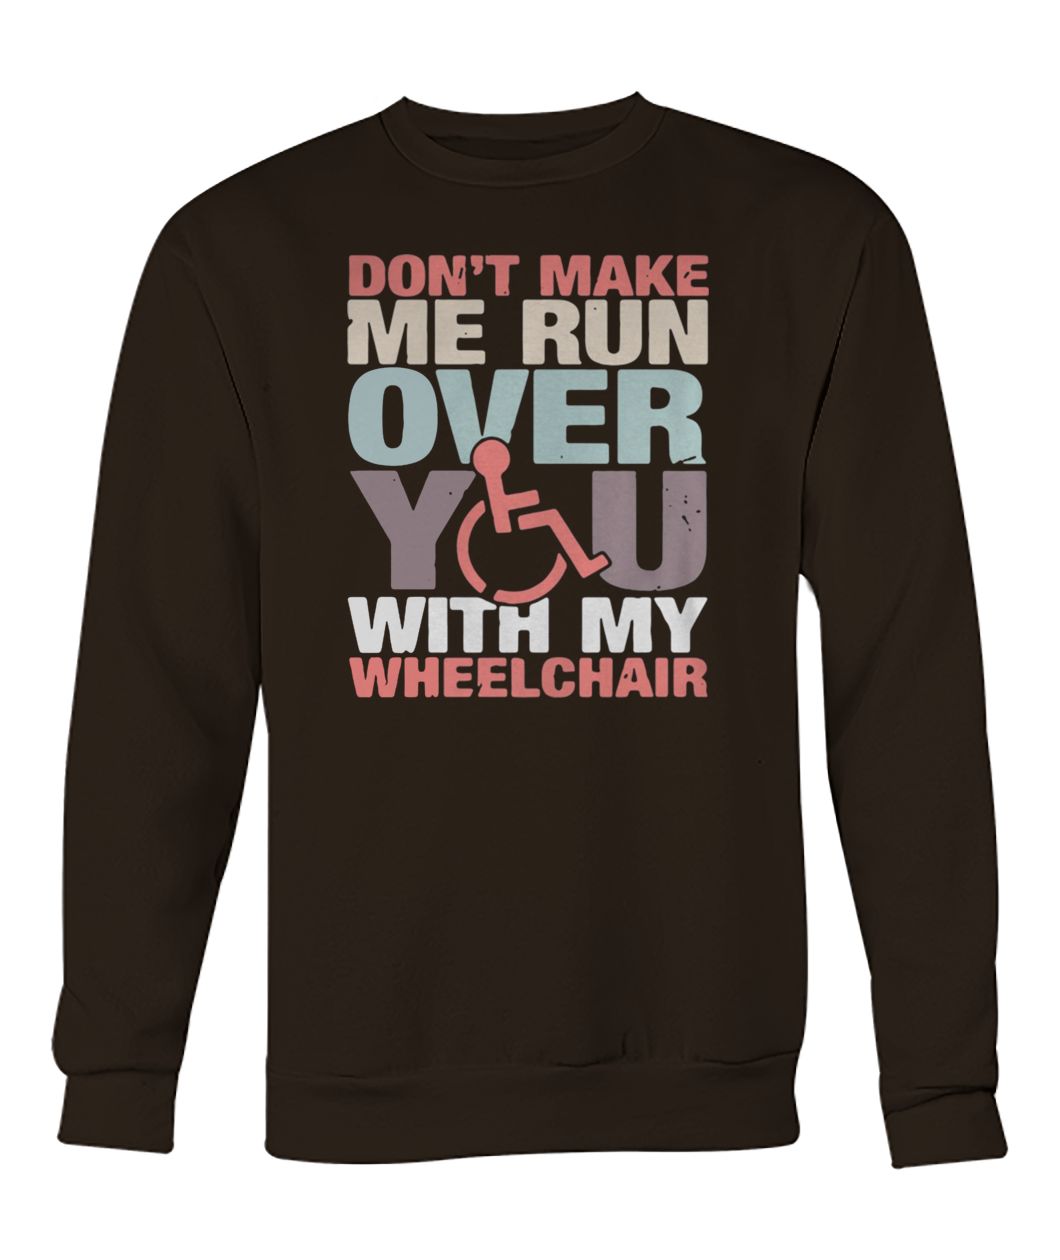 Don't make me run over you with my wheelchair crew neck sweatshirt